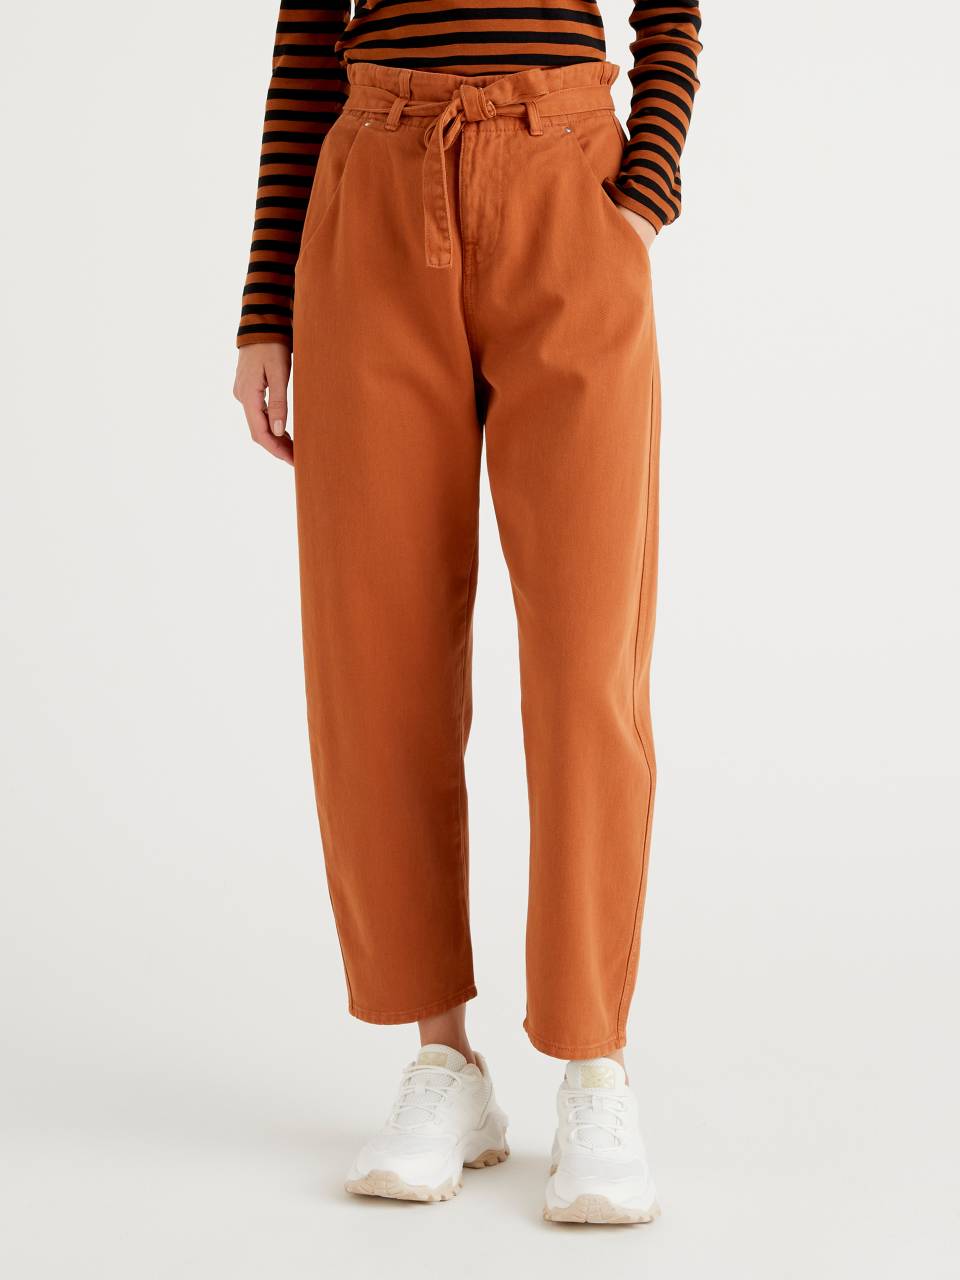 Belted Paperbag-Waist Pant - 7th Avenue | NY&Co